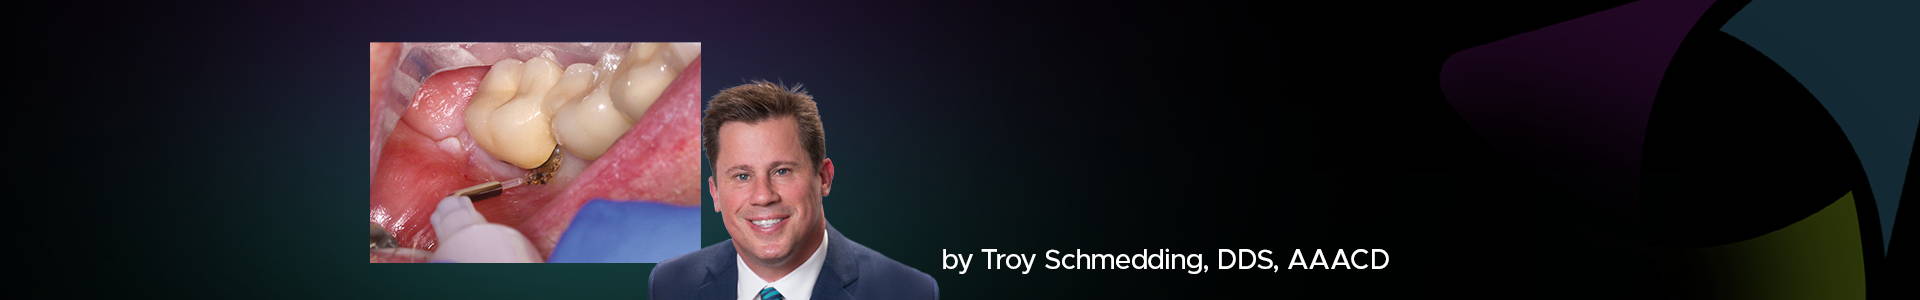 blog banner featuring Dr Troy Schmedding and a clinical image